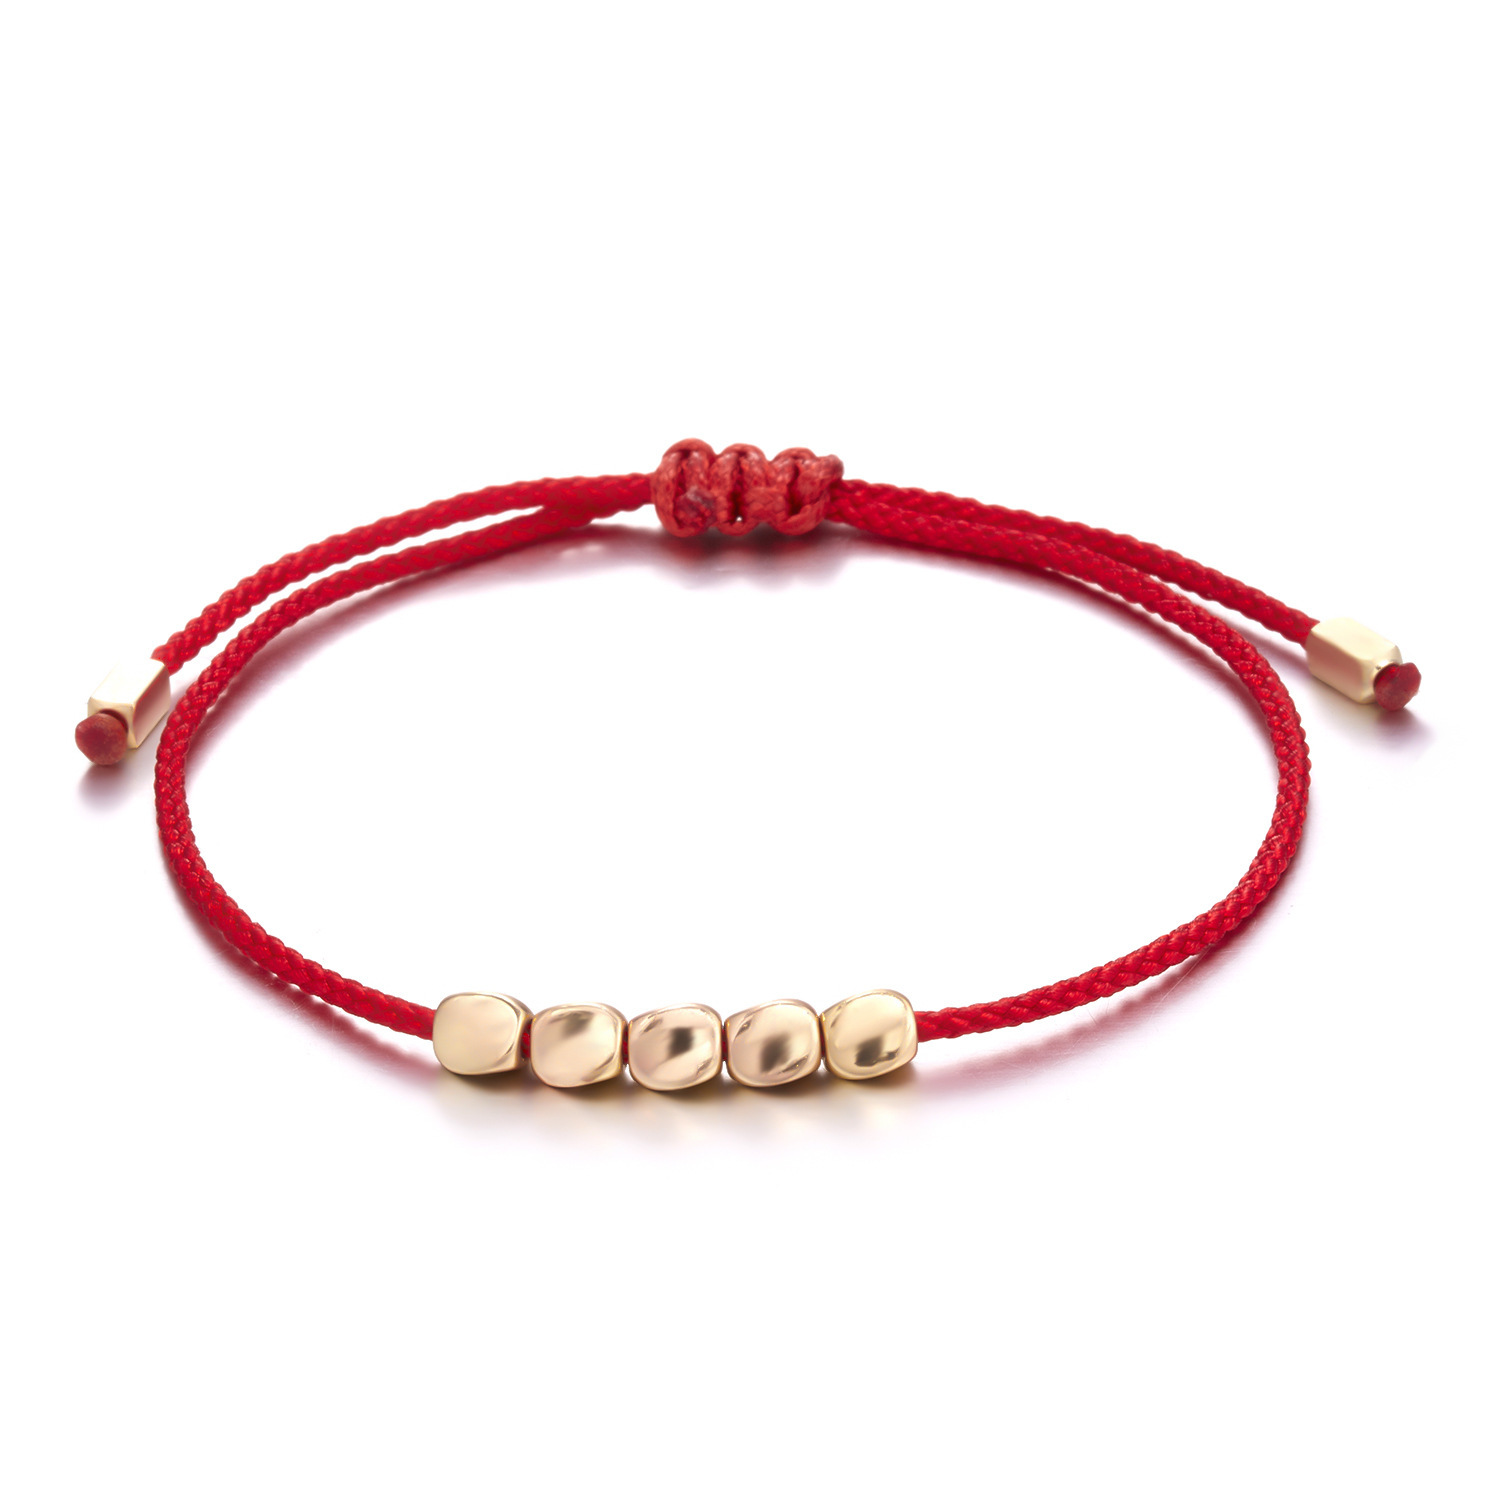 5 red strings with copper beads